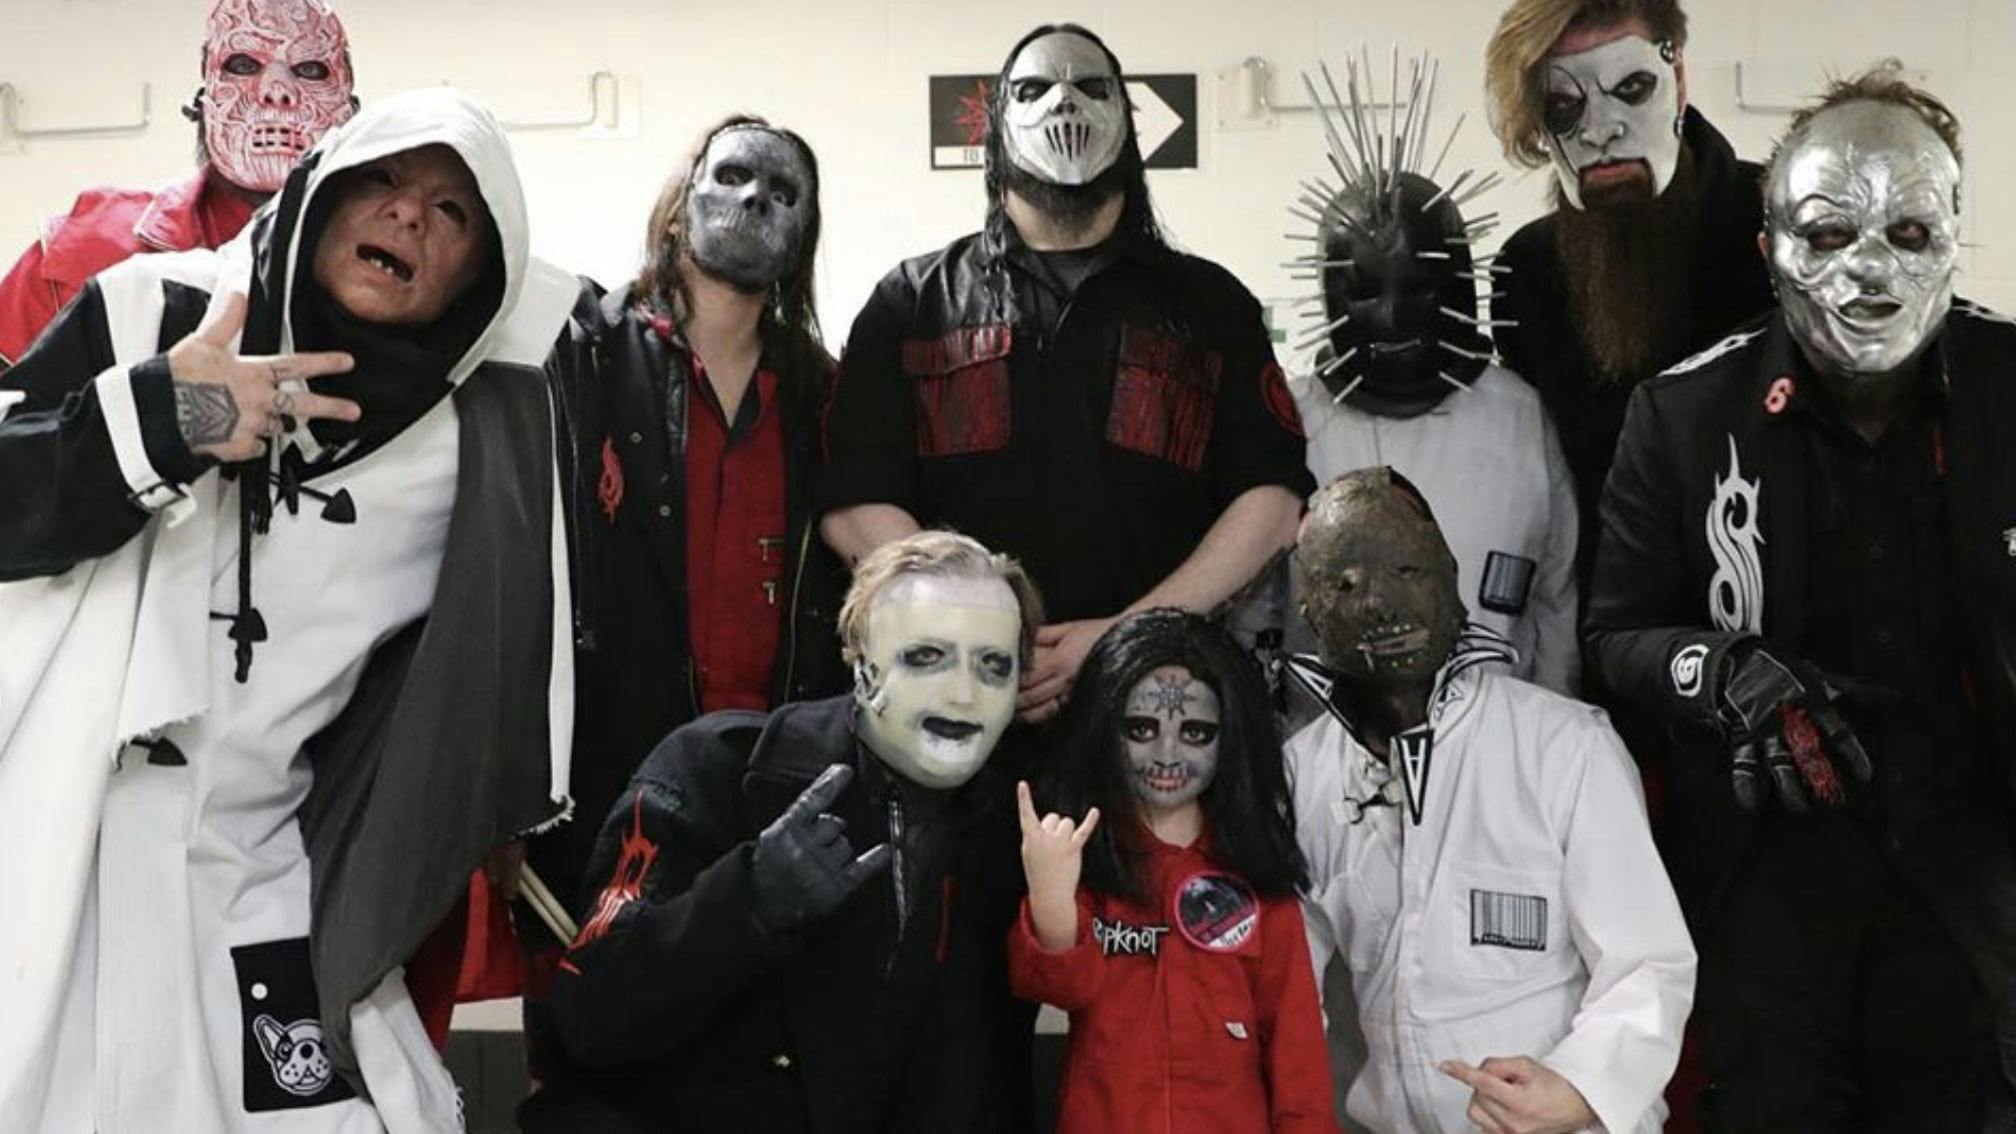 Check Out Five-Year-Old Viral Drummer Caleb Hanging Out With Slipknot